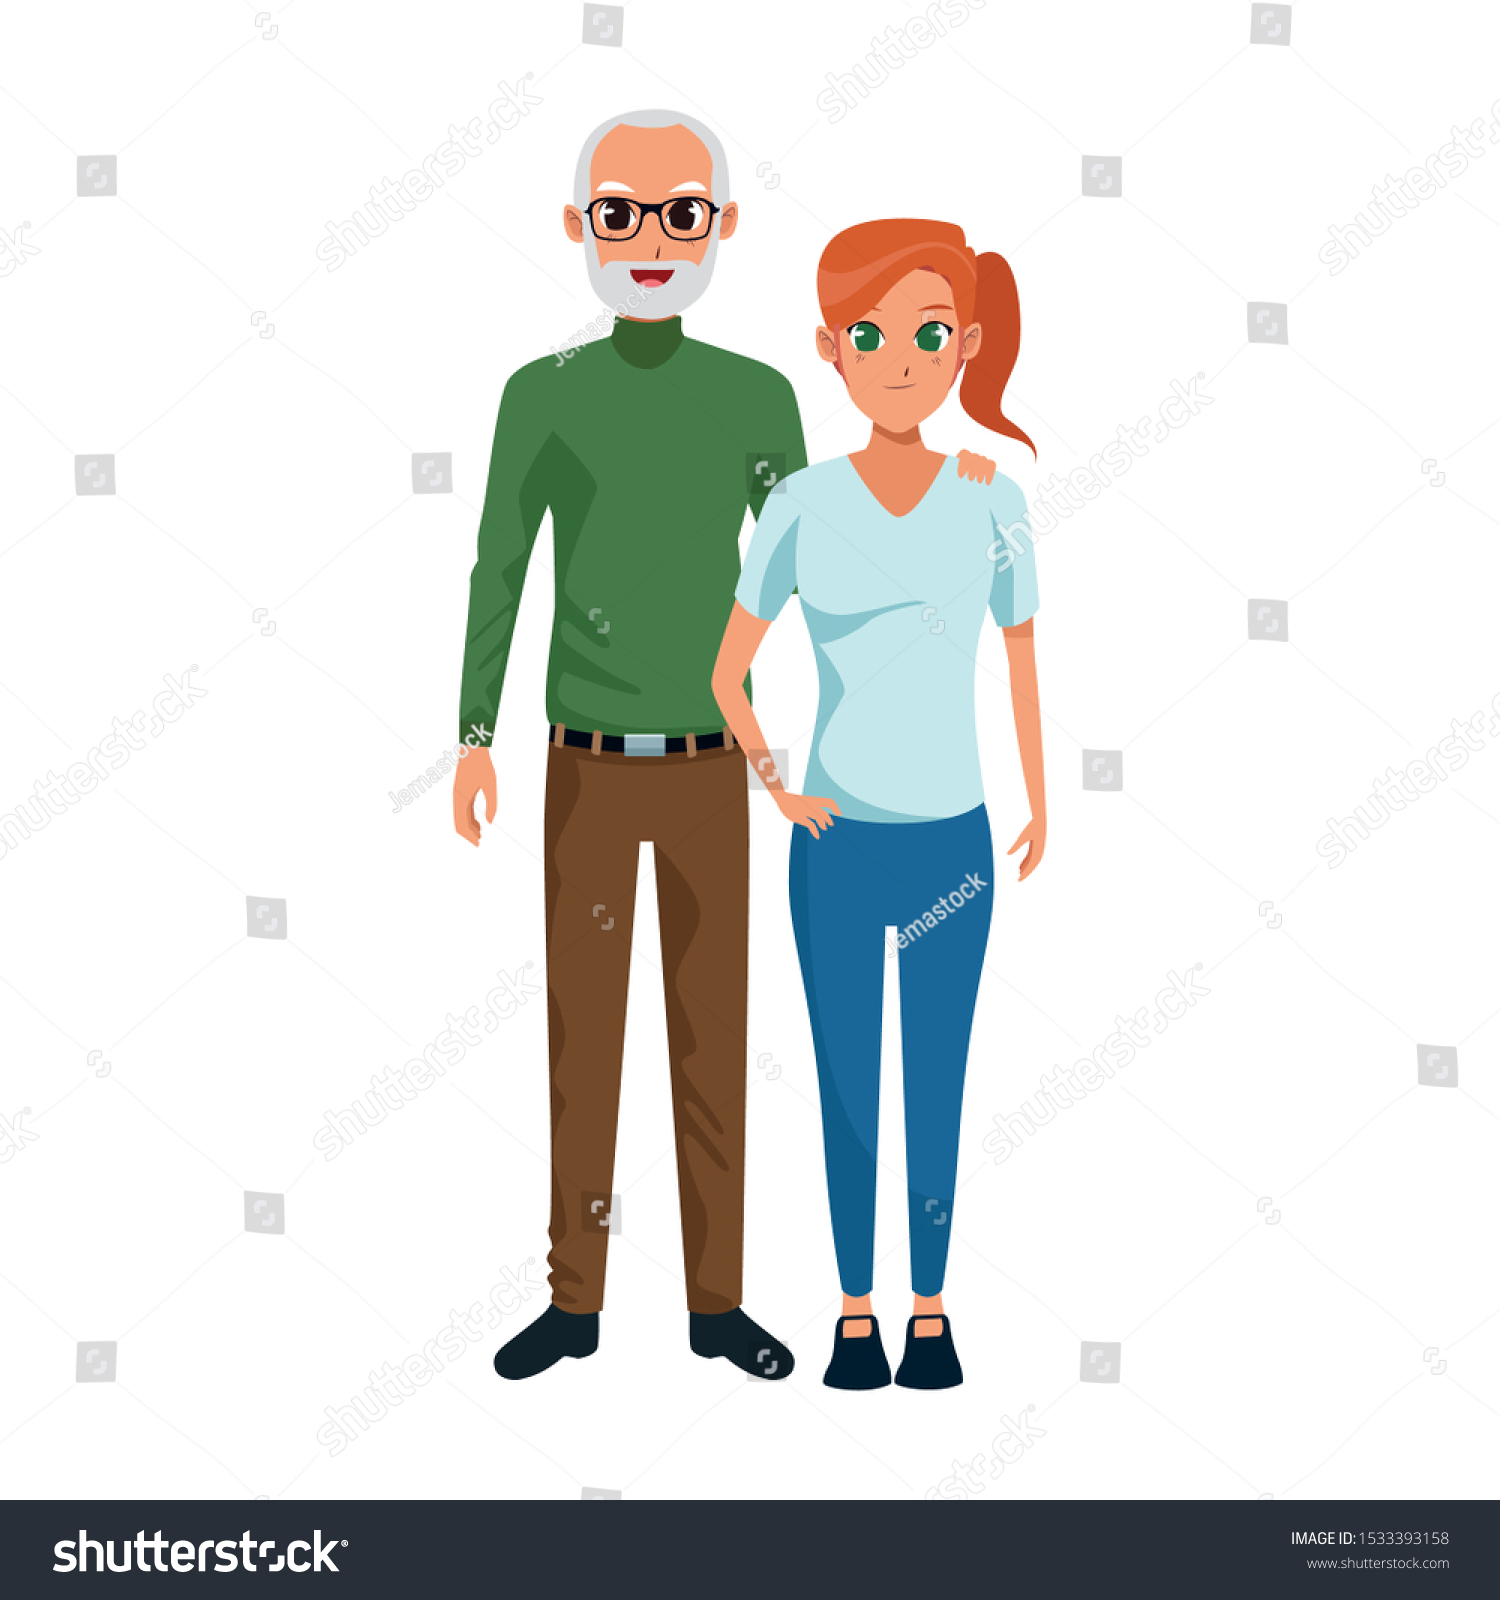 SVG of happy old woman and man together over white background, vector illustration svg